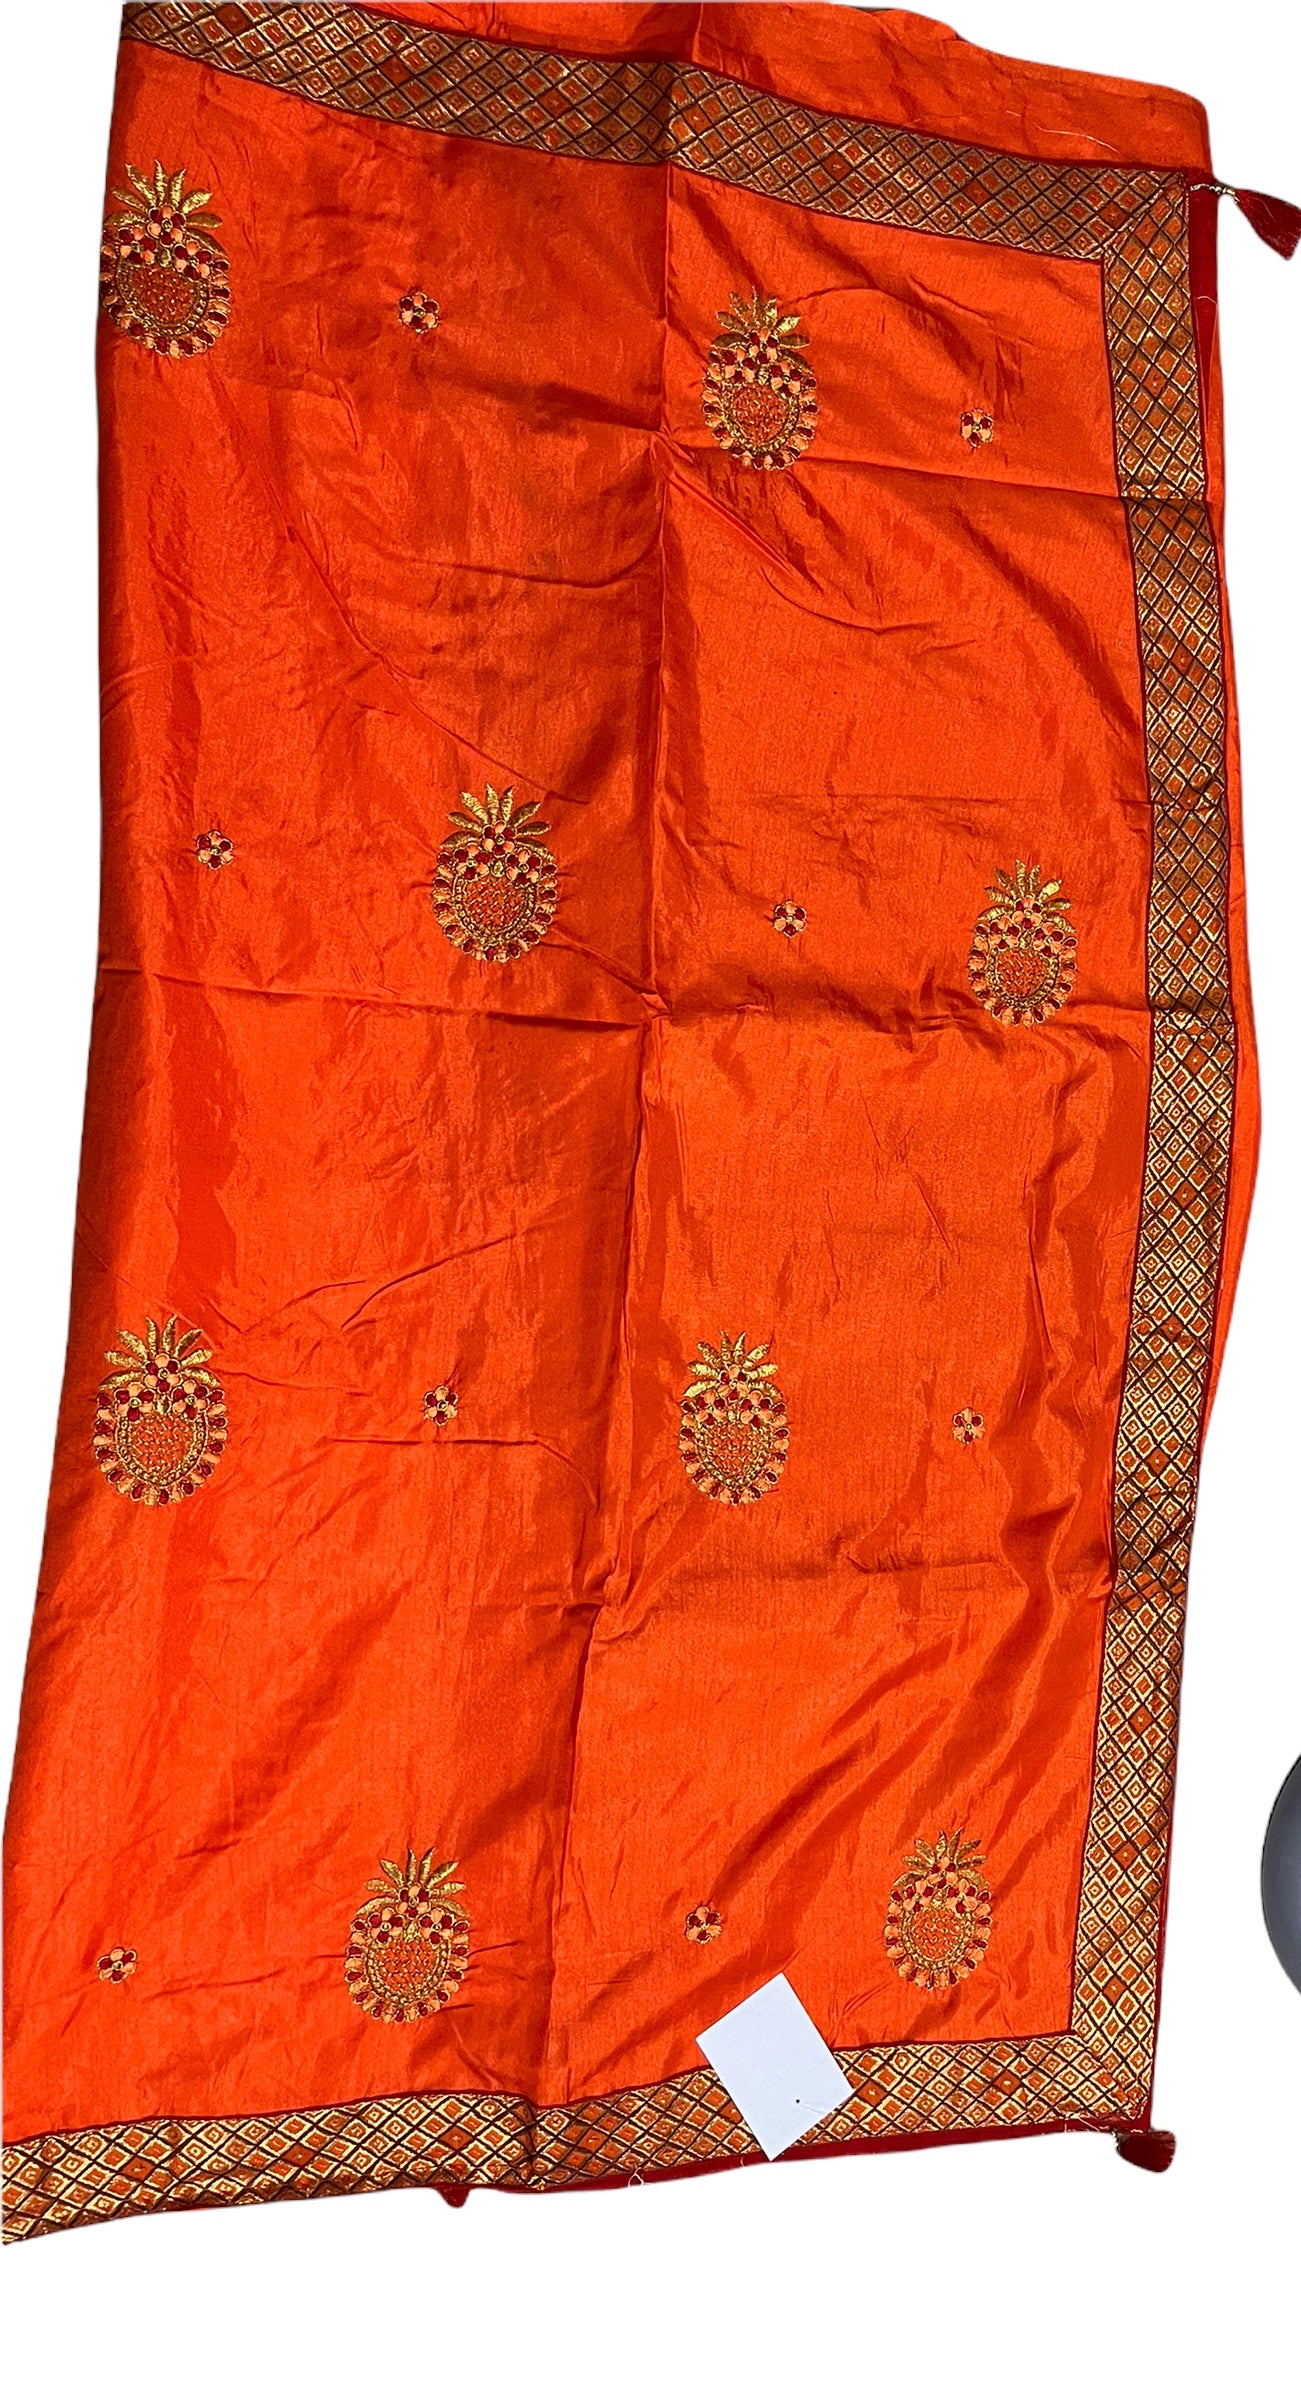 Clearance - Great Value Saree